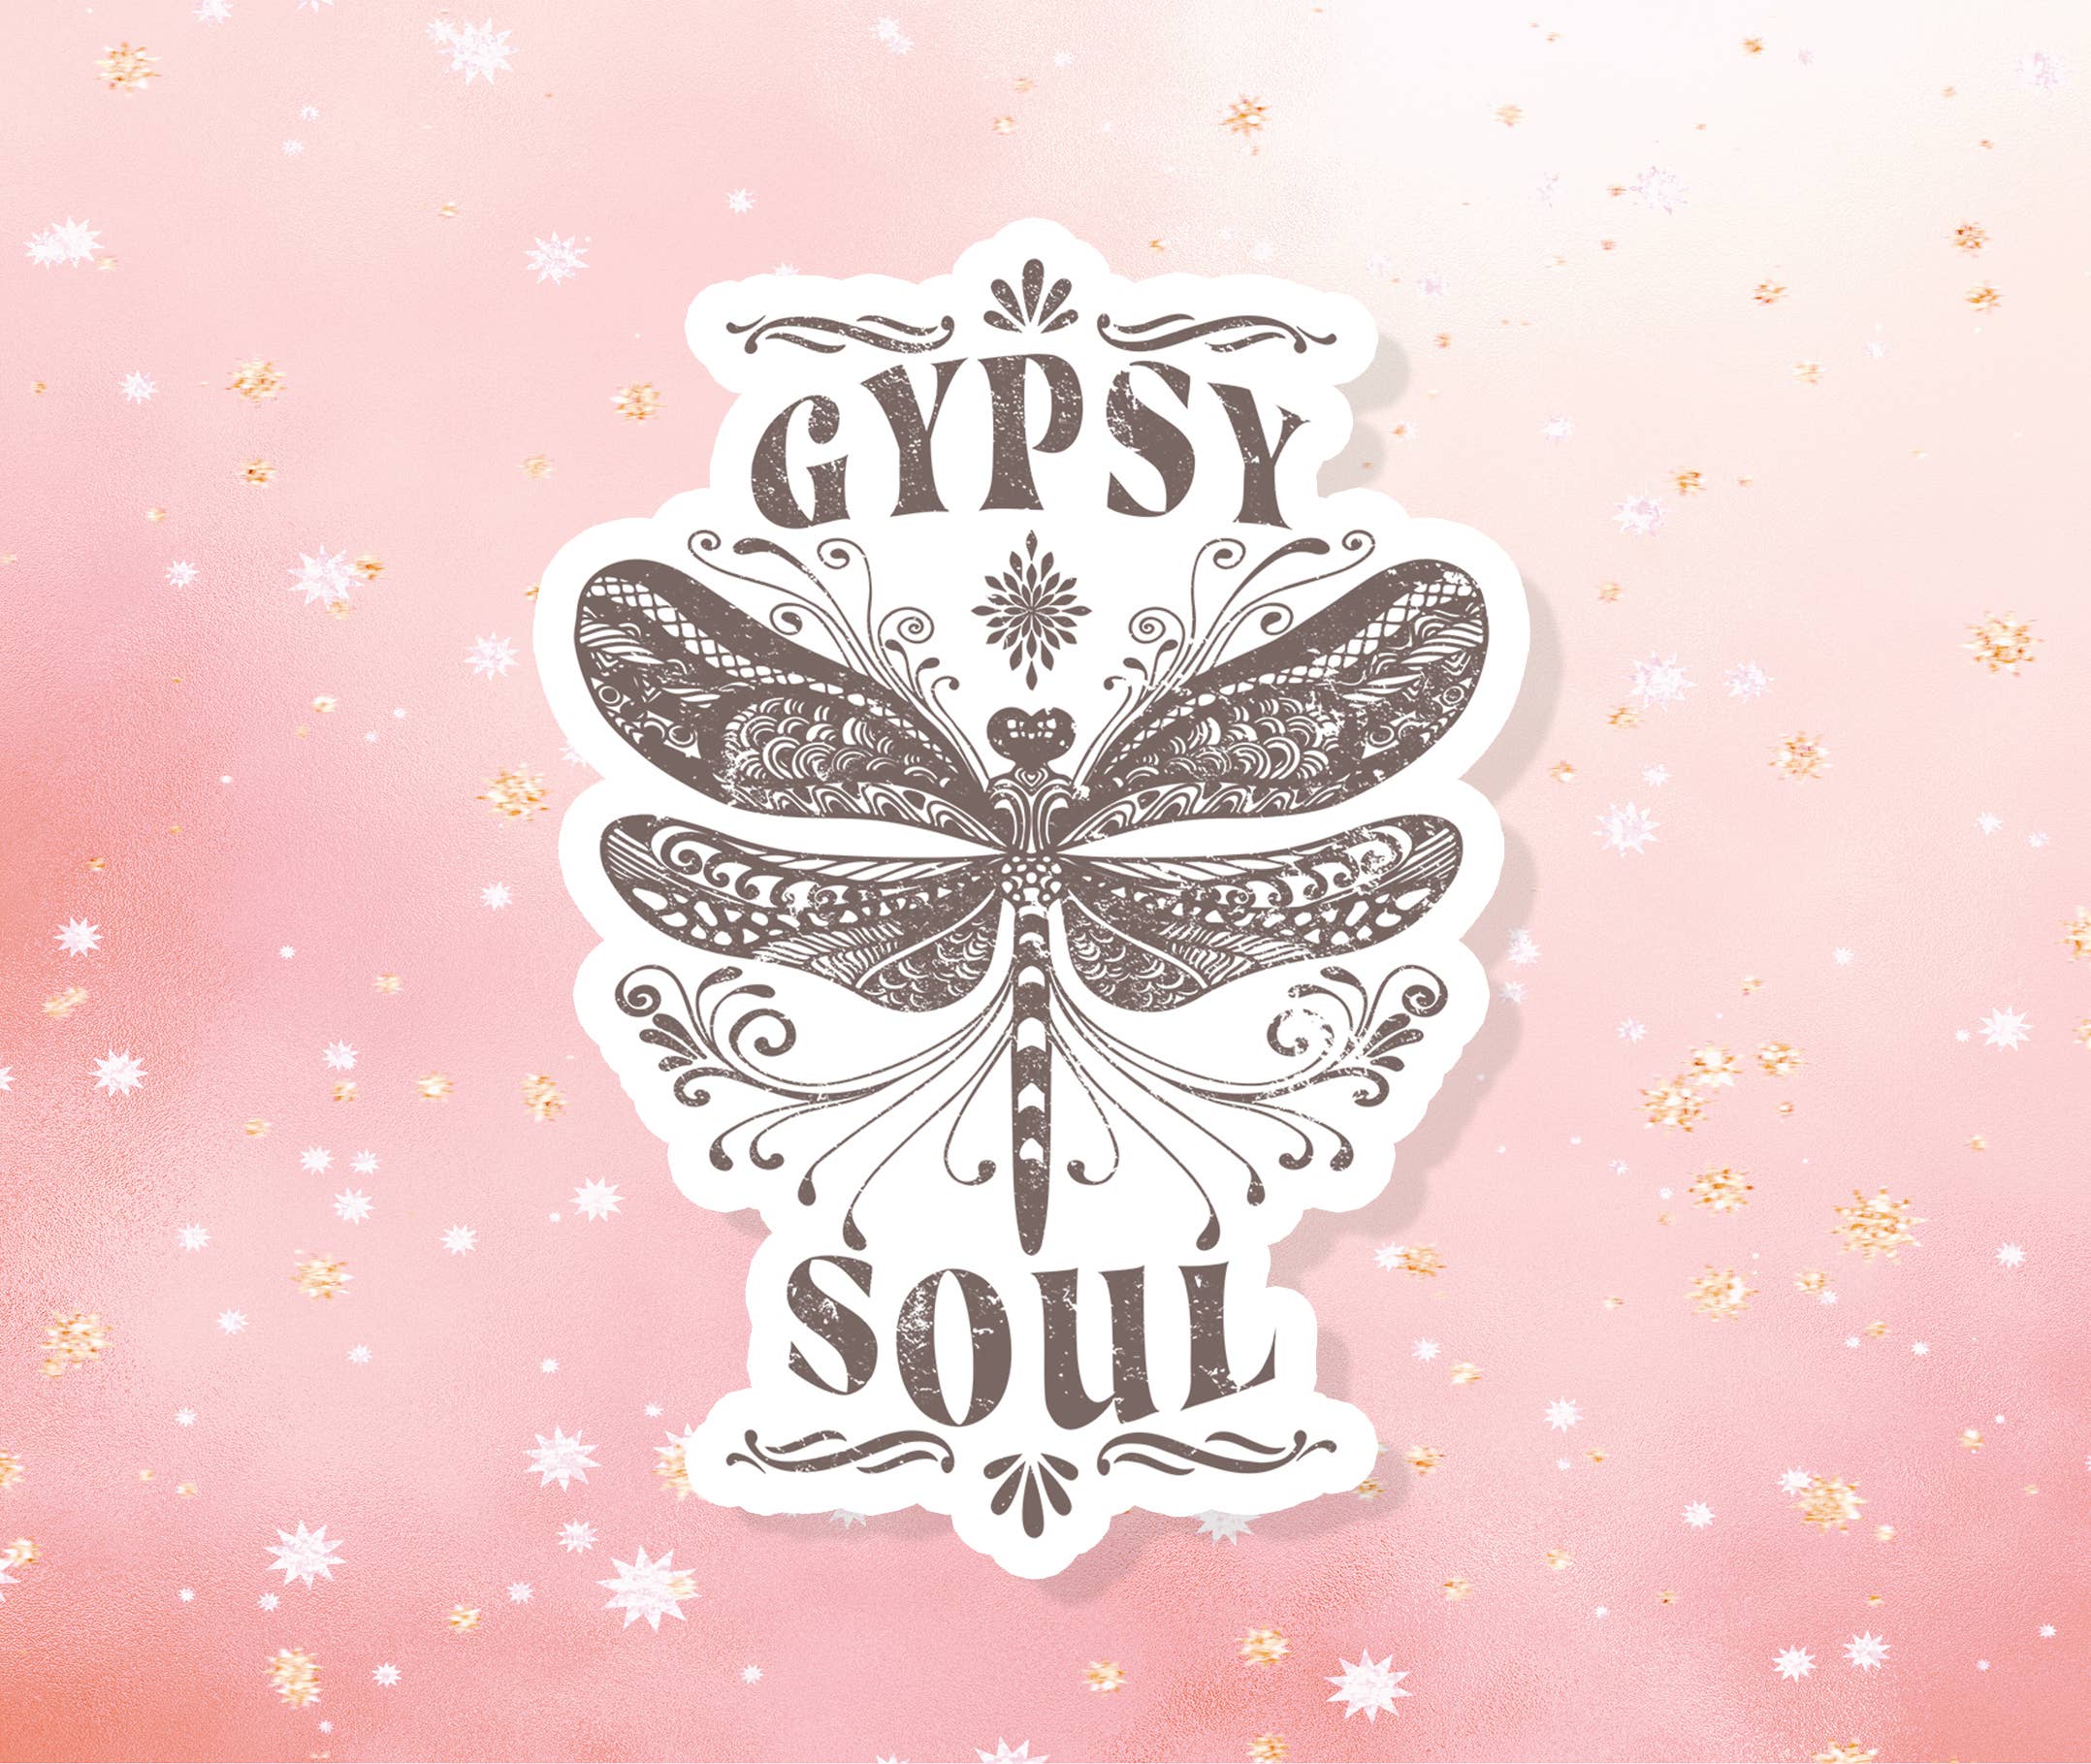 1356 Gypsy Soul Images Stock Photos  Vectors  Shutterstock